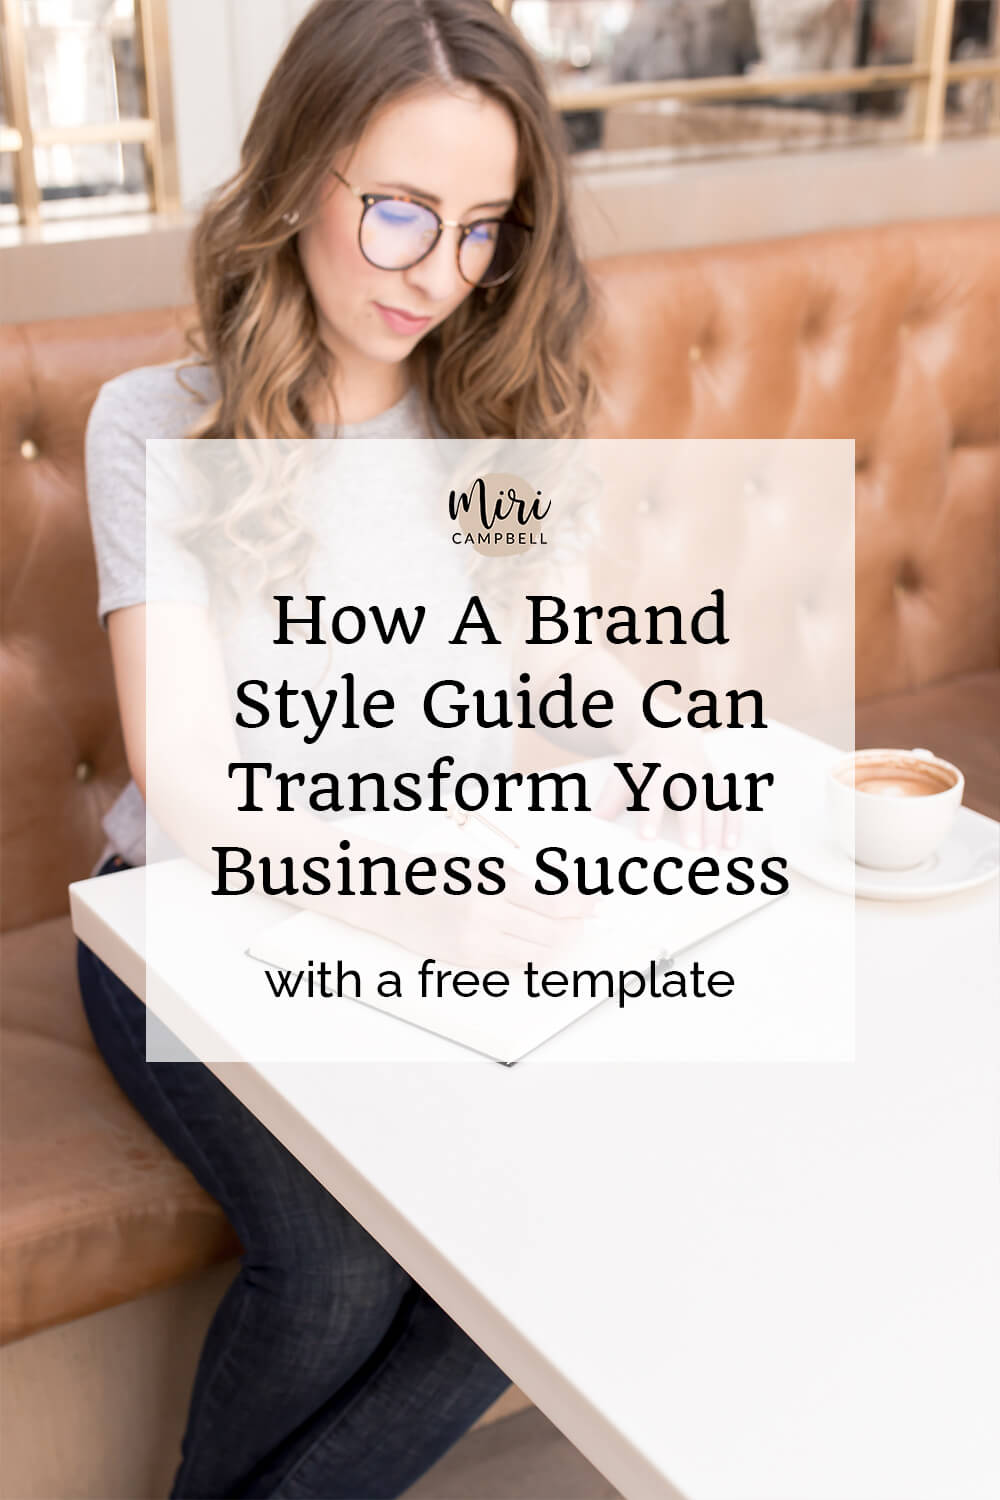 From Good To Great: How A Brand Style Guide Can Transform Your Business Success